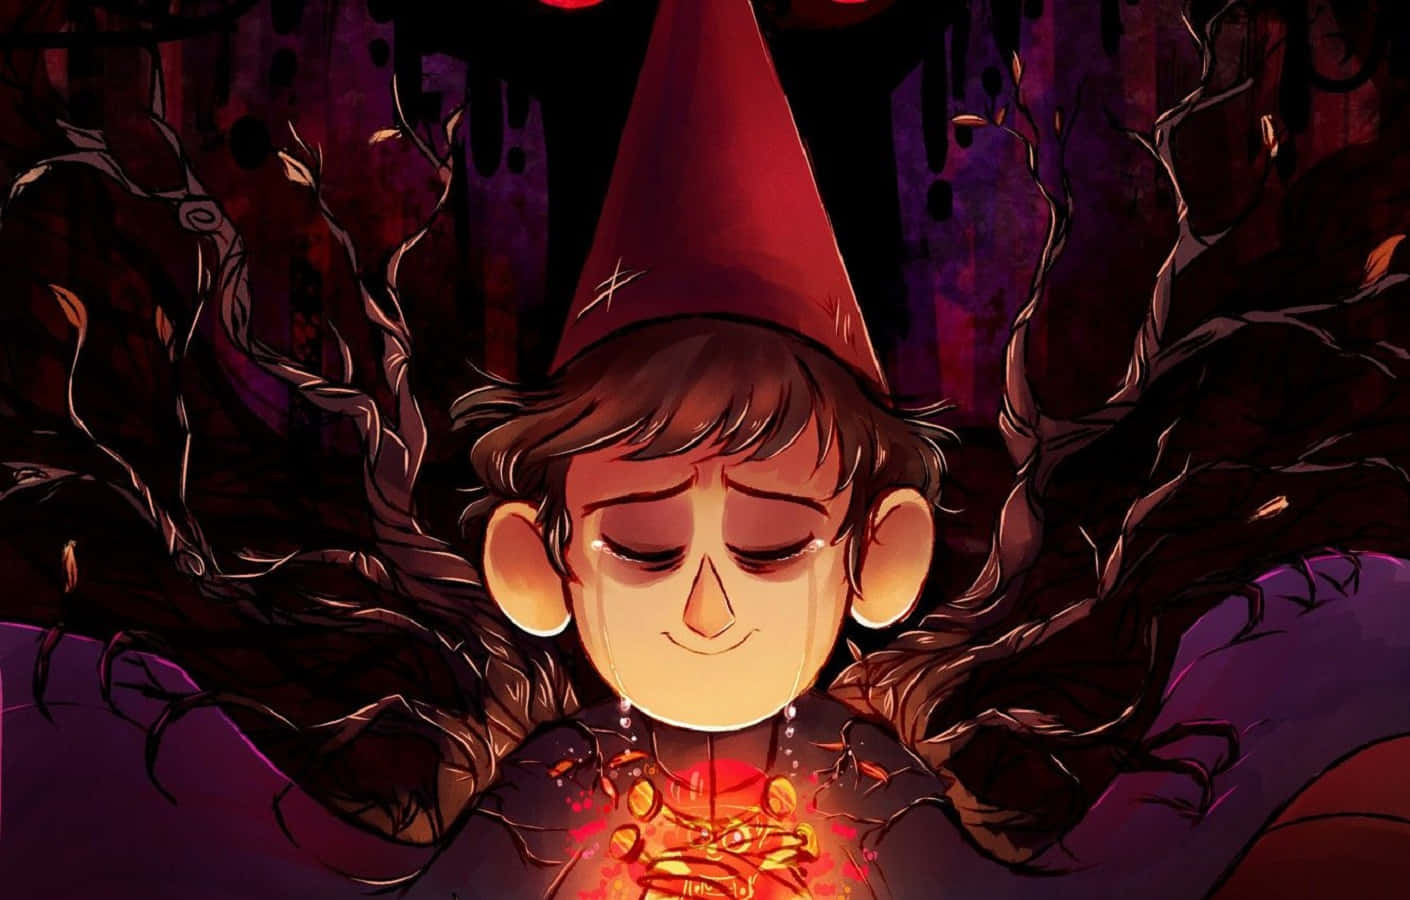 Follow the Adventure with Wirt and Greg